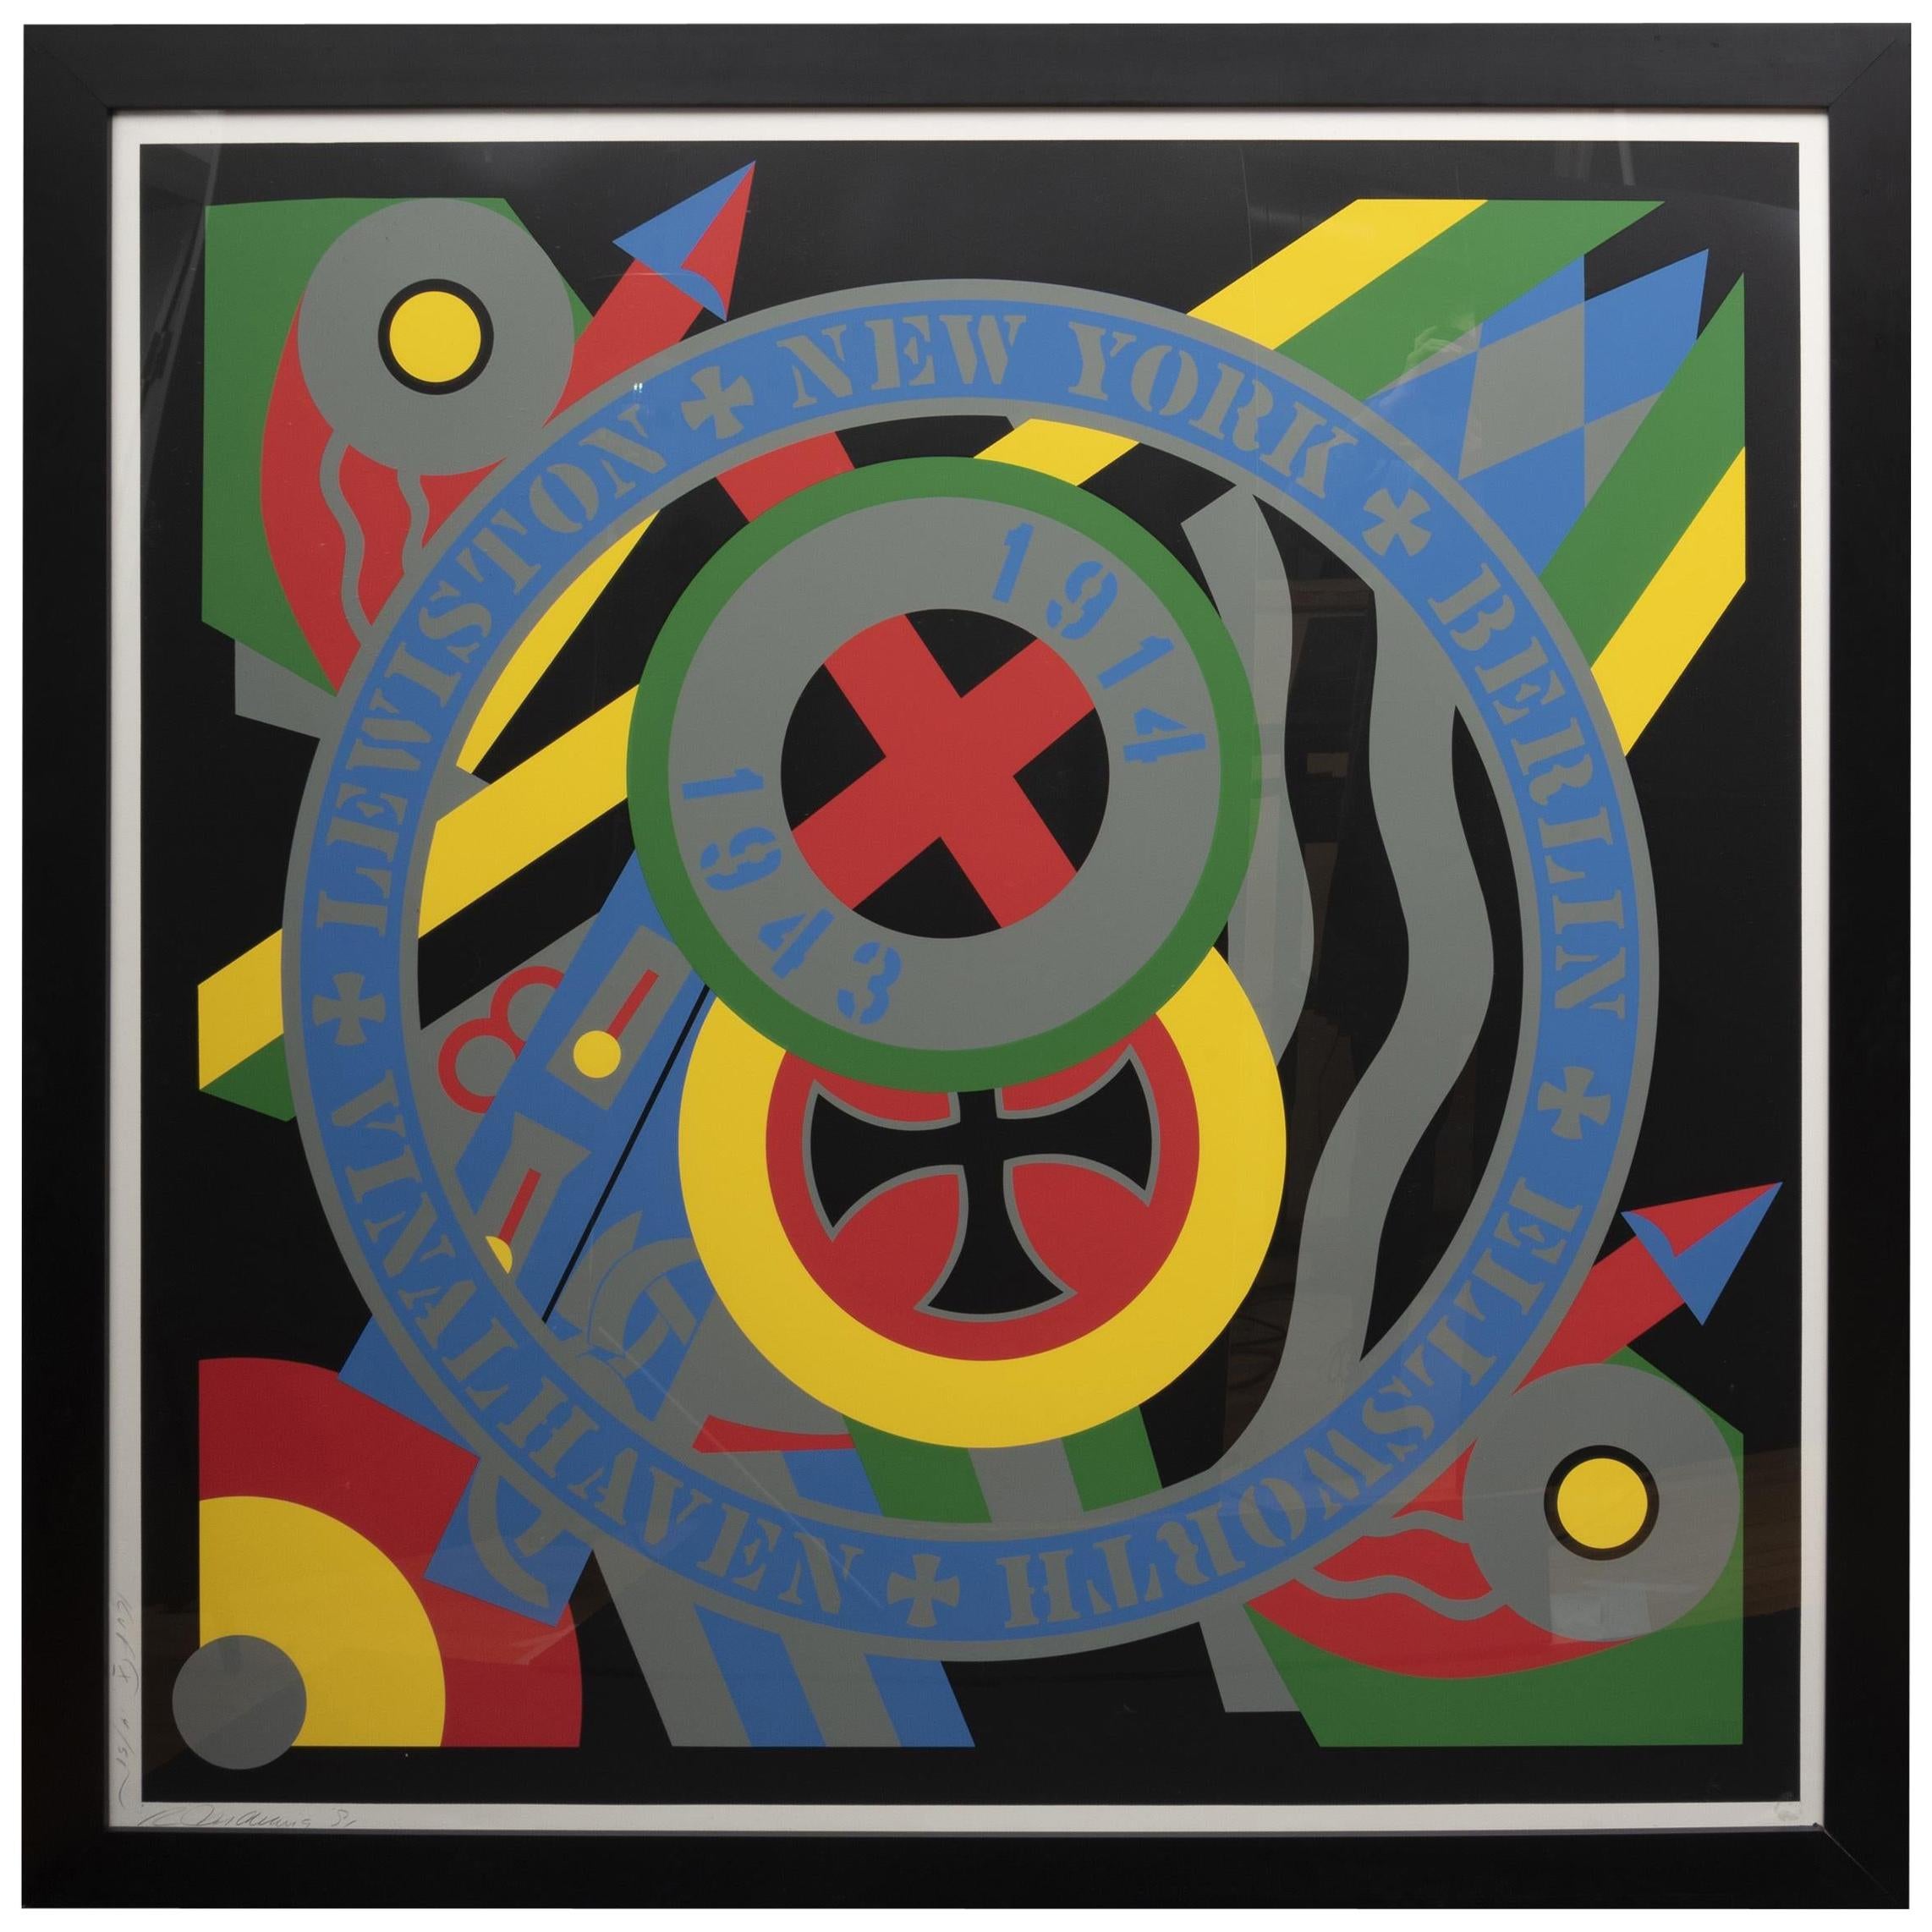 Robert Indiana (1928-2018): Hartley Elegies. Screenprint in colors on wove paper, 1991, signed and dated in pencil, numbered 14/50.

Measures: 60 x 60 in. (sheet), 65 1/2 x 65 1/2 in. (frame).